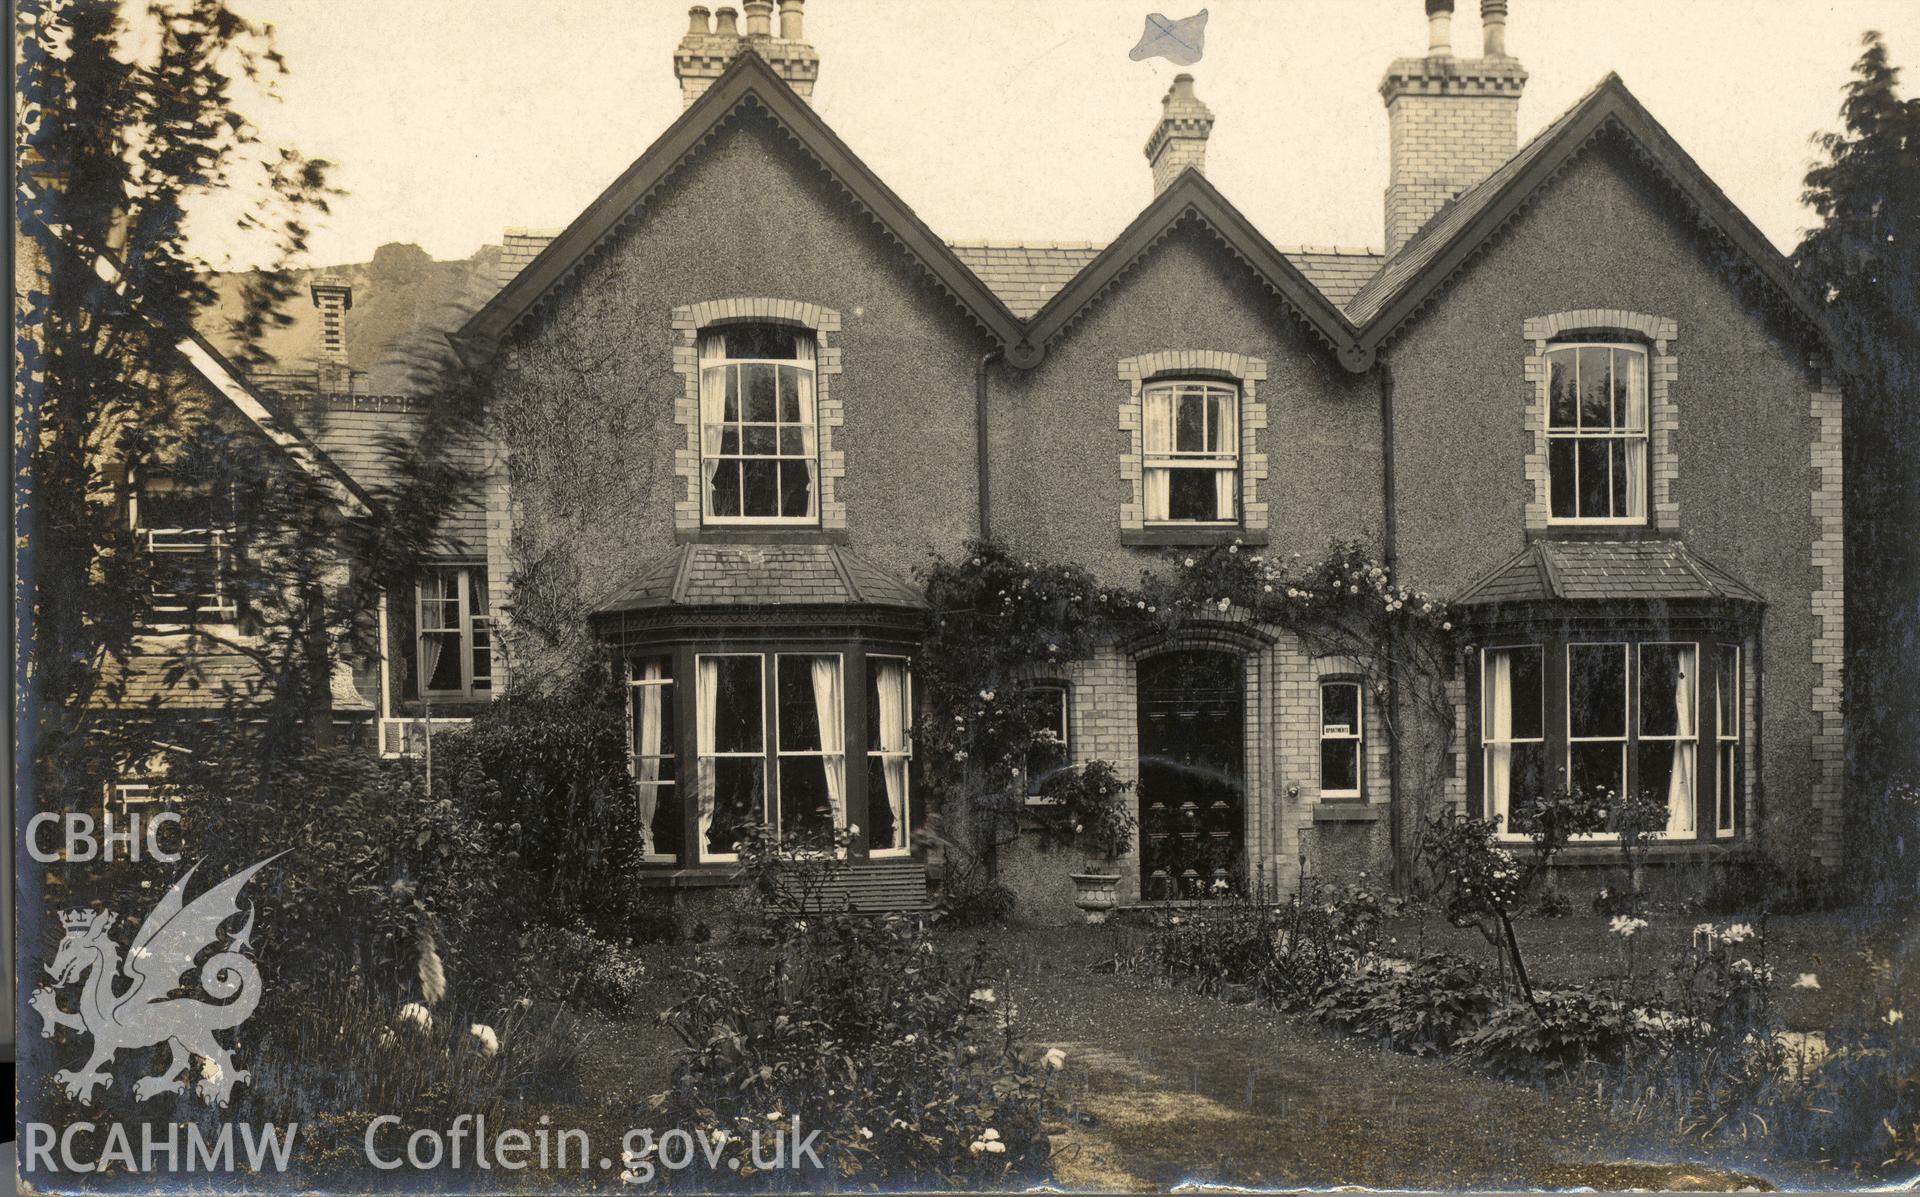 Digitised postcard image of unidentified house, Llanfairfechan, Fenter and Son, Llanfairfechan. Produced by Parks and Gardens Data Services, from an original item in the Peter Davis Collection at Parks and Gardens UK. We hold only web-resolution images of this collection, suitable for viewing on screen and for research purposes only. We do not hold the original images, or publication quality scans.